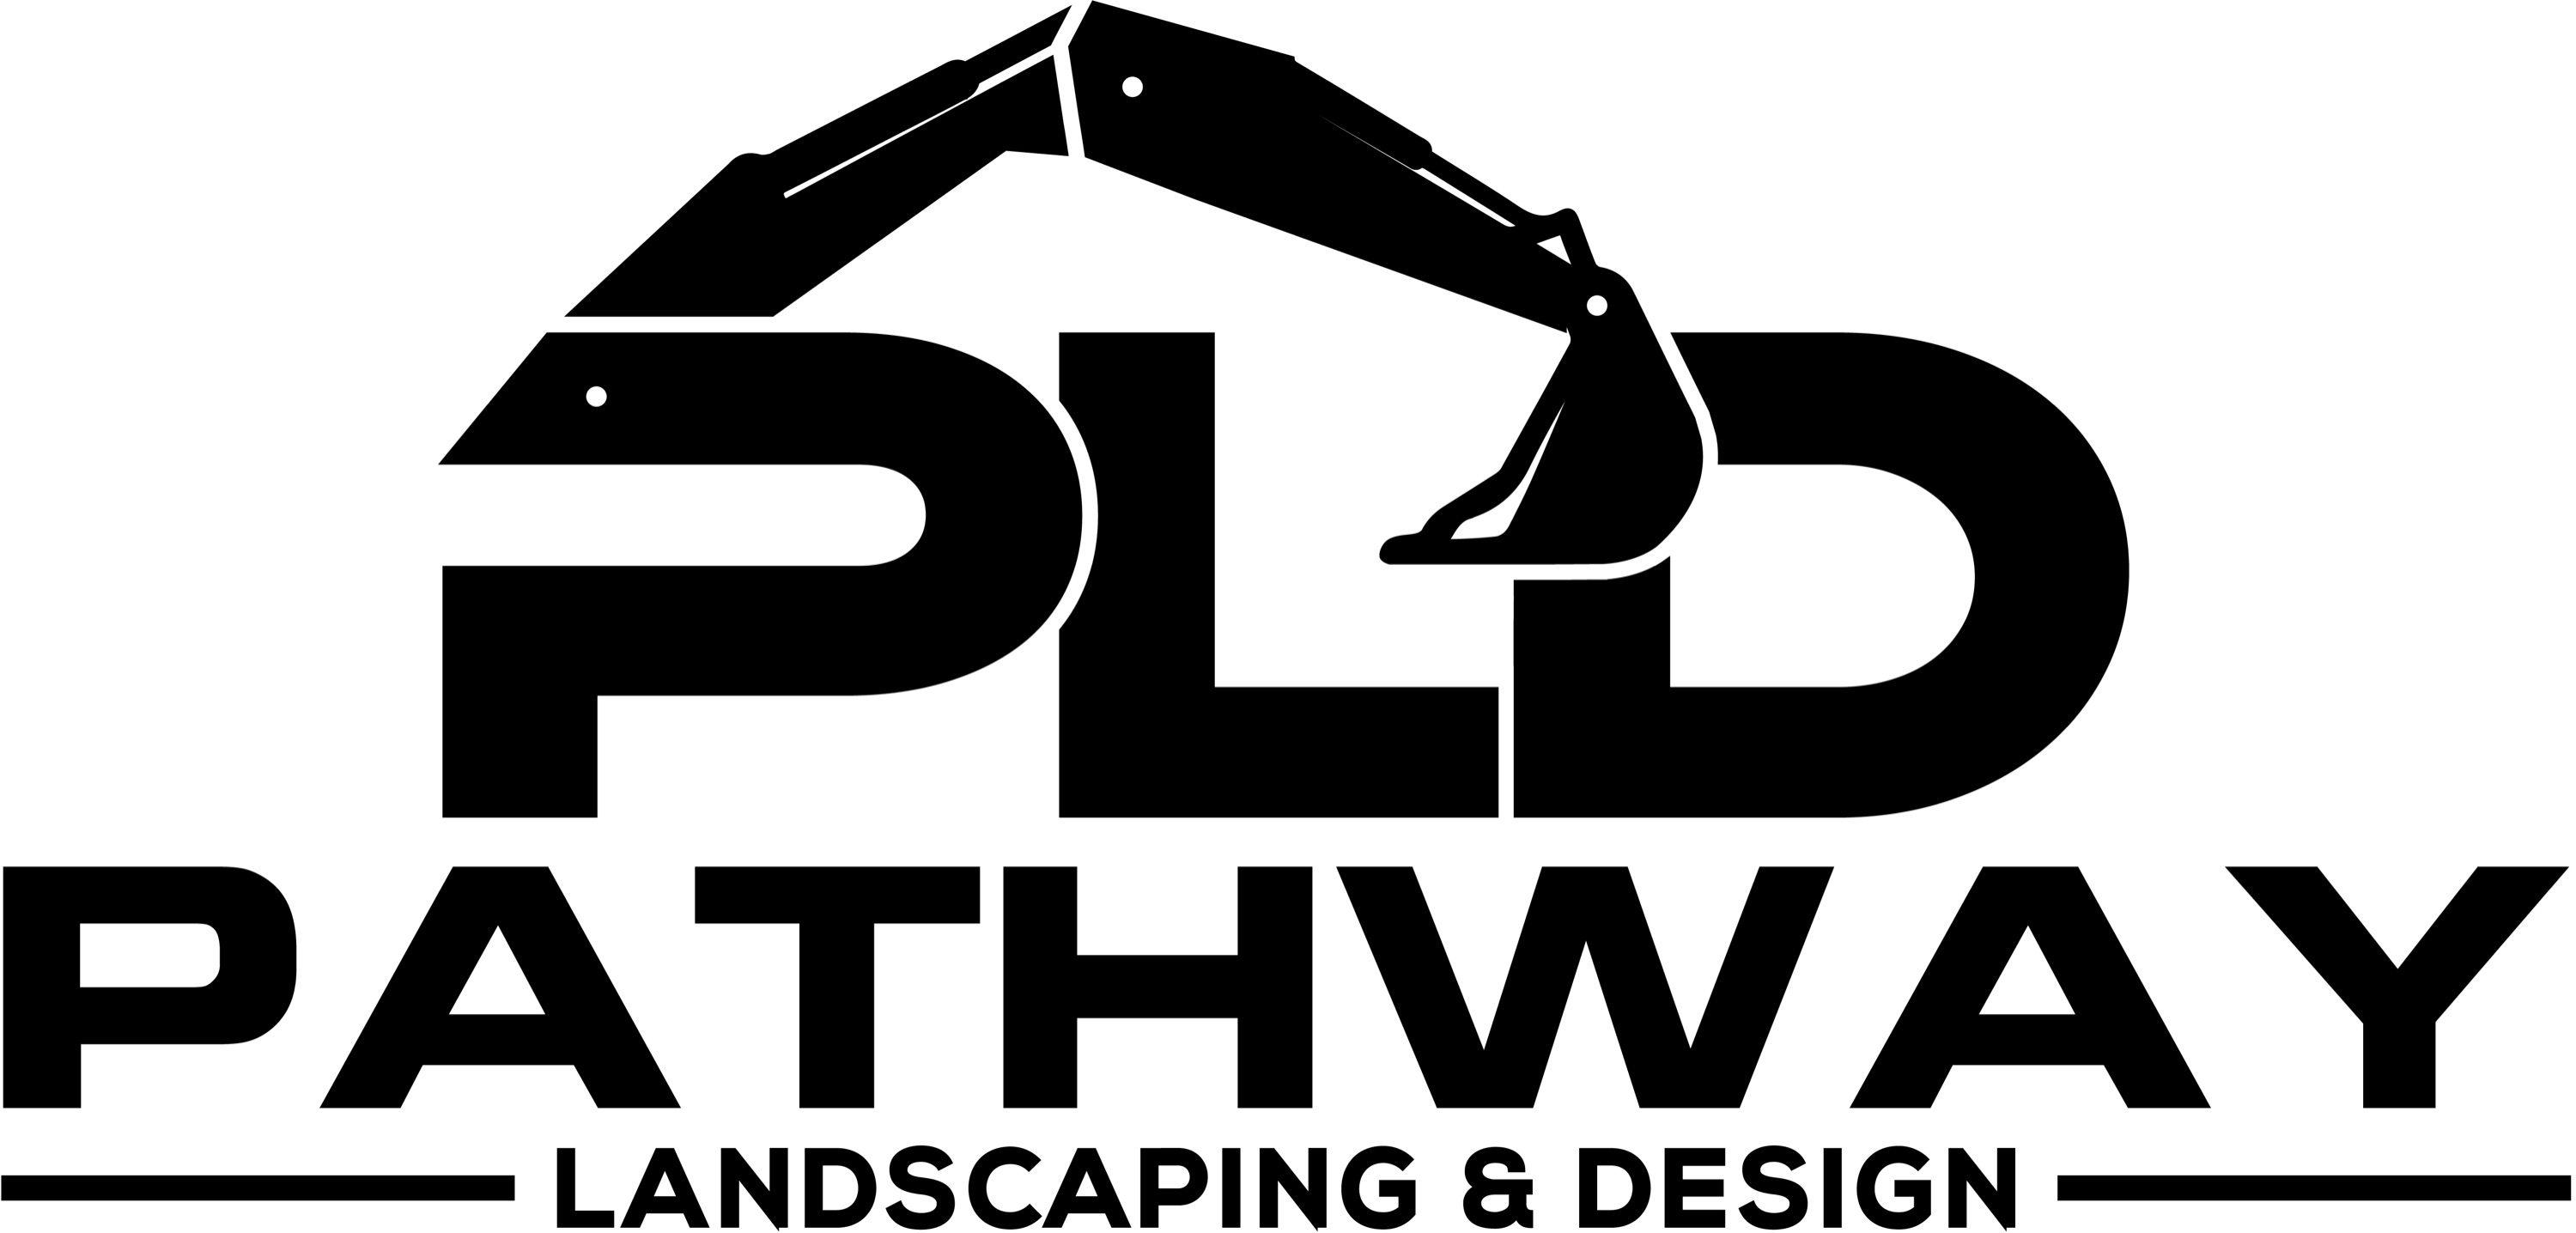 Pathway Landscaping and Design Logo